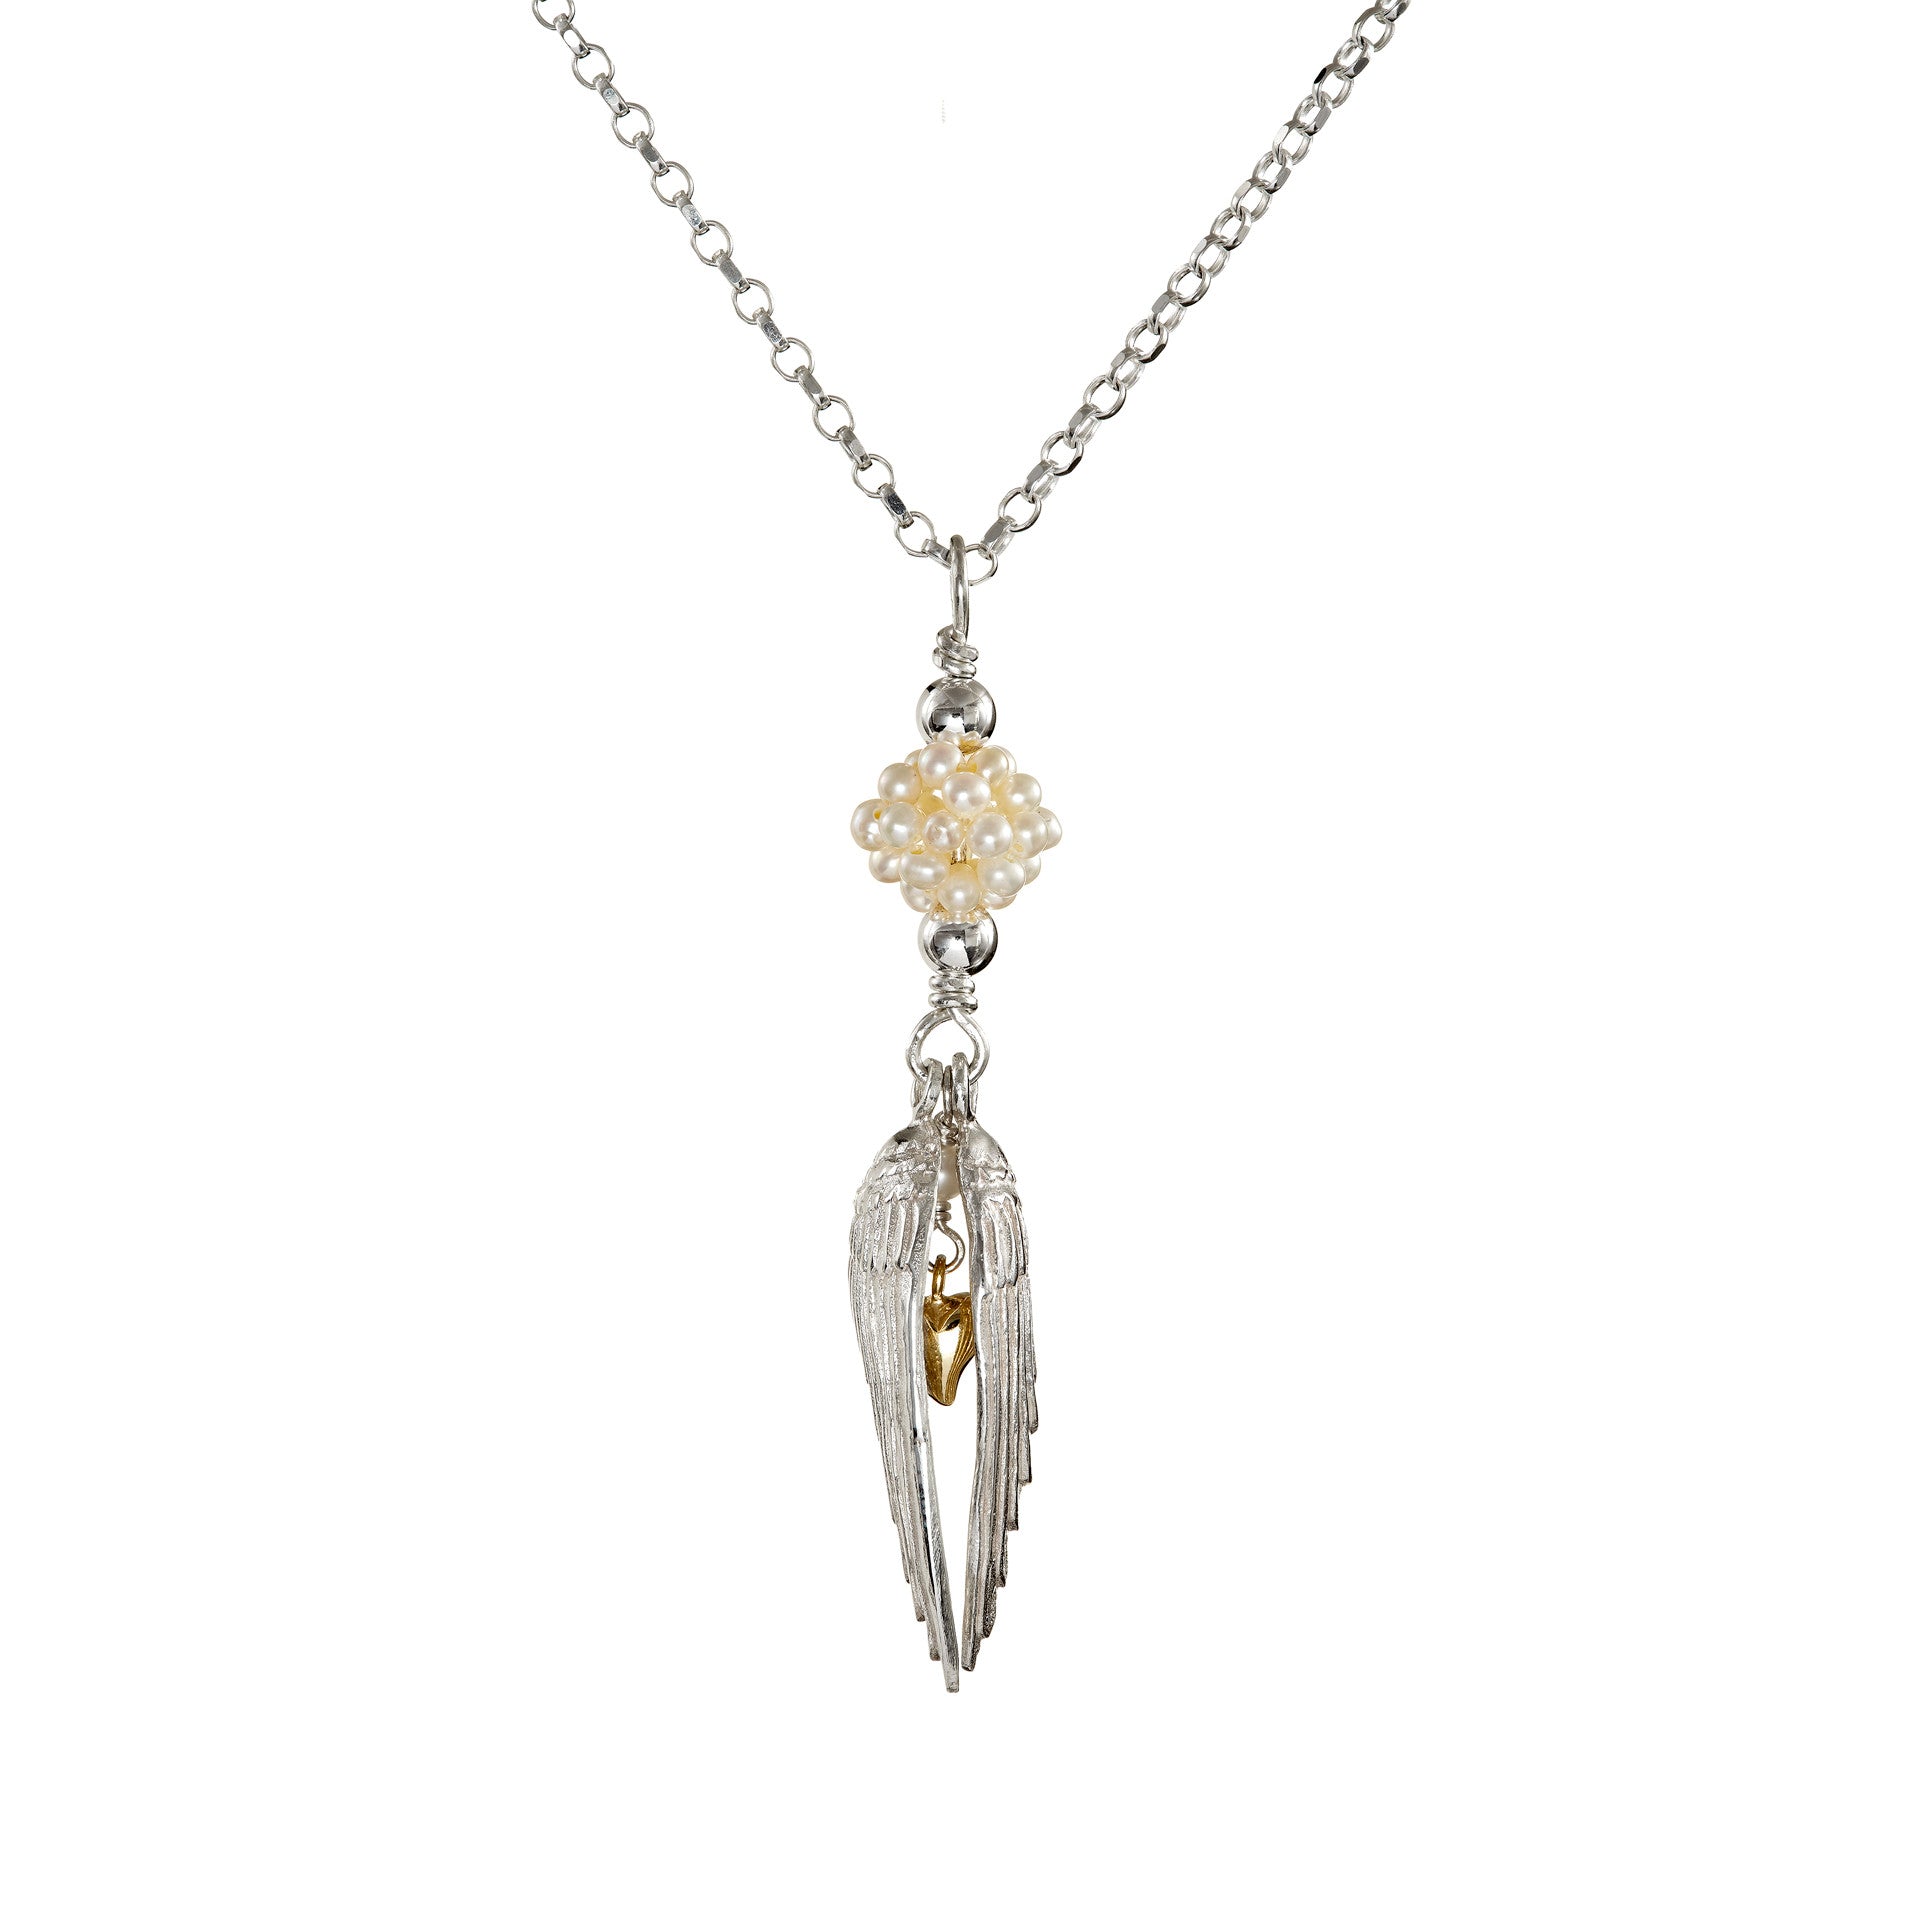 Sterling silver Angel Protection Pendant with a gold heart and gemstone beading, this special piece of jewelry makes the perfect gift! Part of Elena Brennan's Angel Jewelry collection.